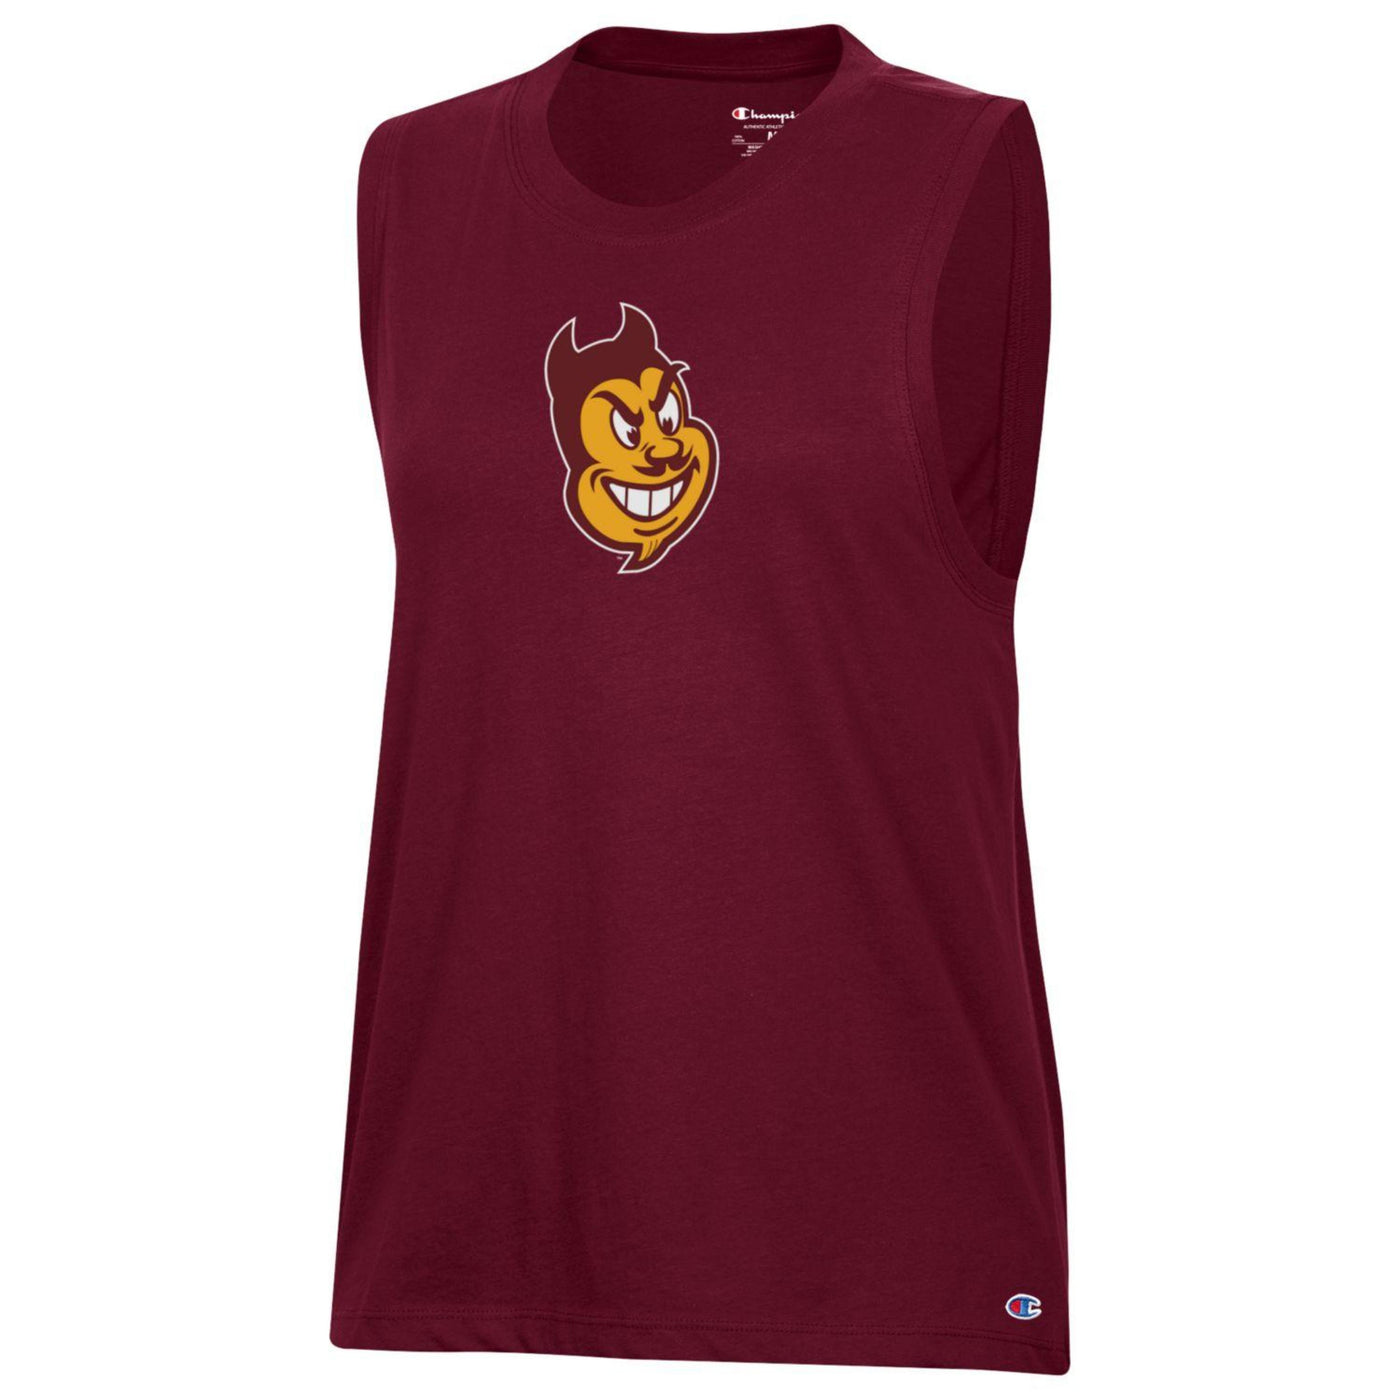 ASU maroon womens tank top with the msacot sparky face on the center of chest